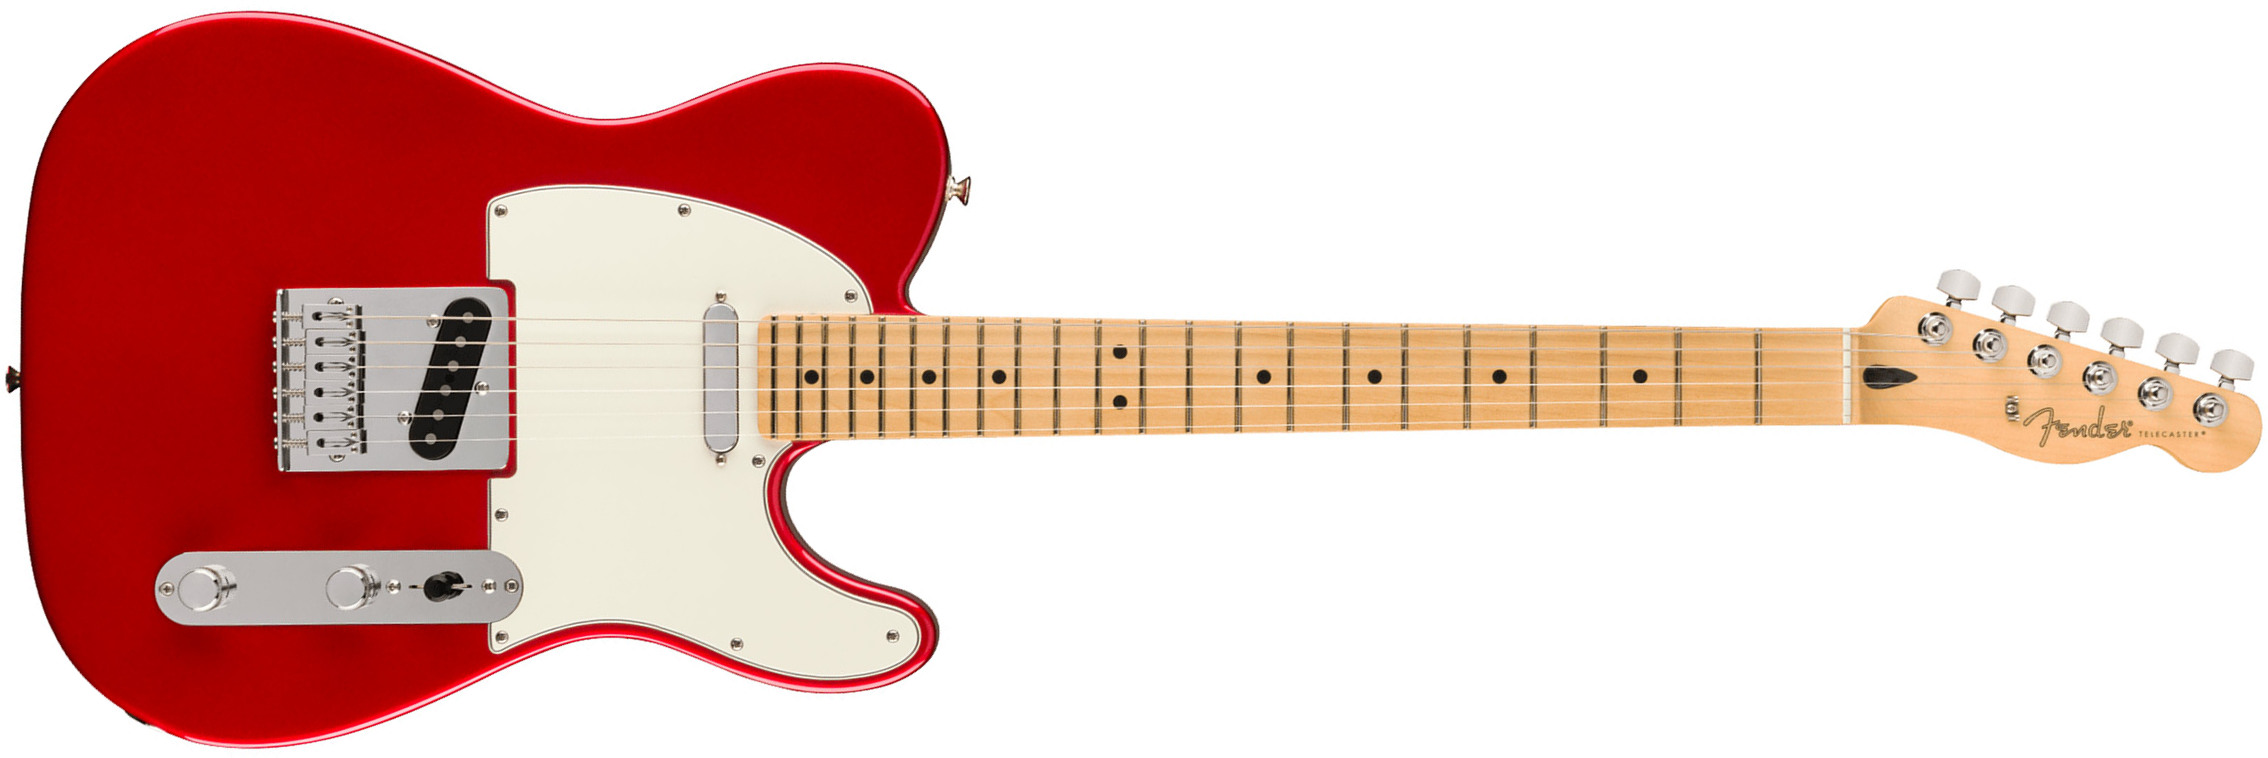 Fender Tele Player Mex 2023 2s Ht Mn - Candy Apple Red - E-Gitarre in Teleform - Main picture